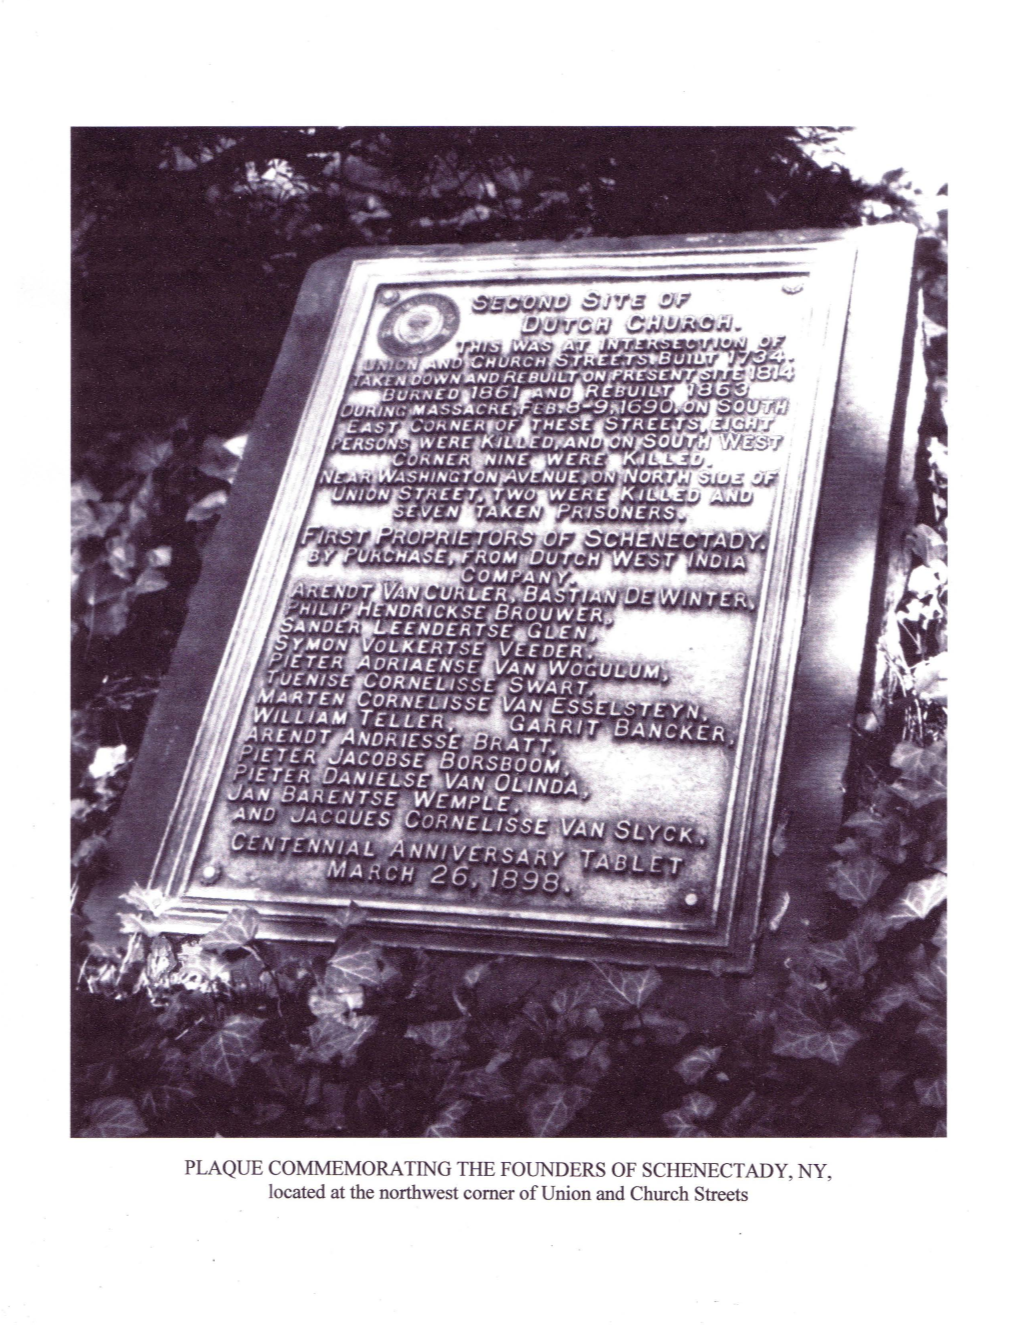 PLAQUE COMMEMORATING the FOUNDERS of SCHENECTADY, NY, Located at the Northwest Comer of Union and Church Streets Note: As the Result of the Removal of Pages in Volume